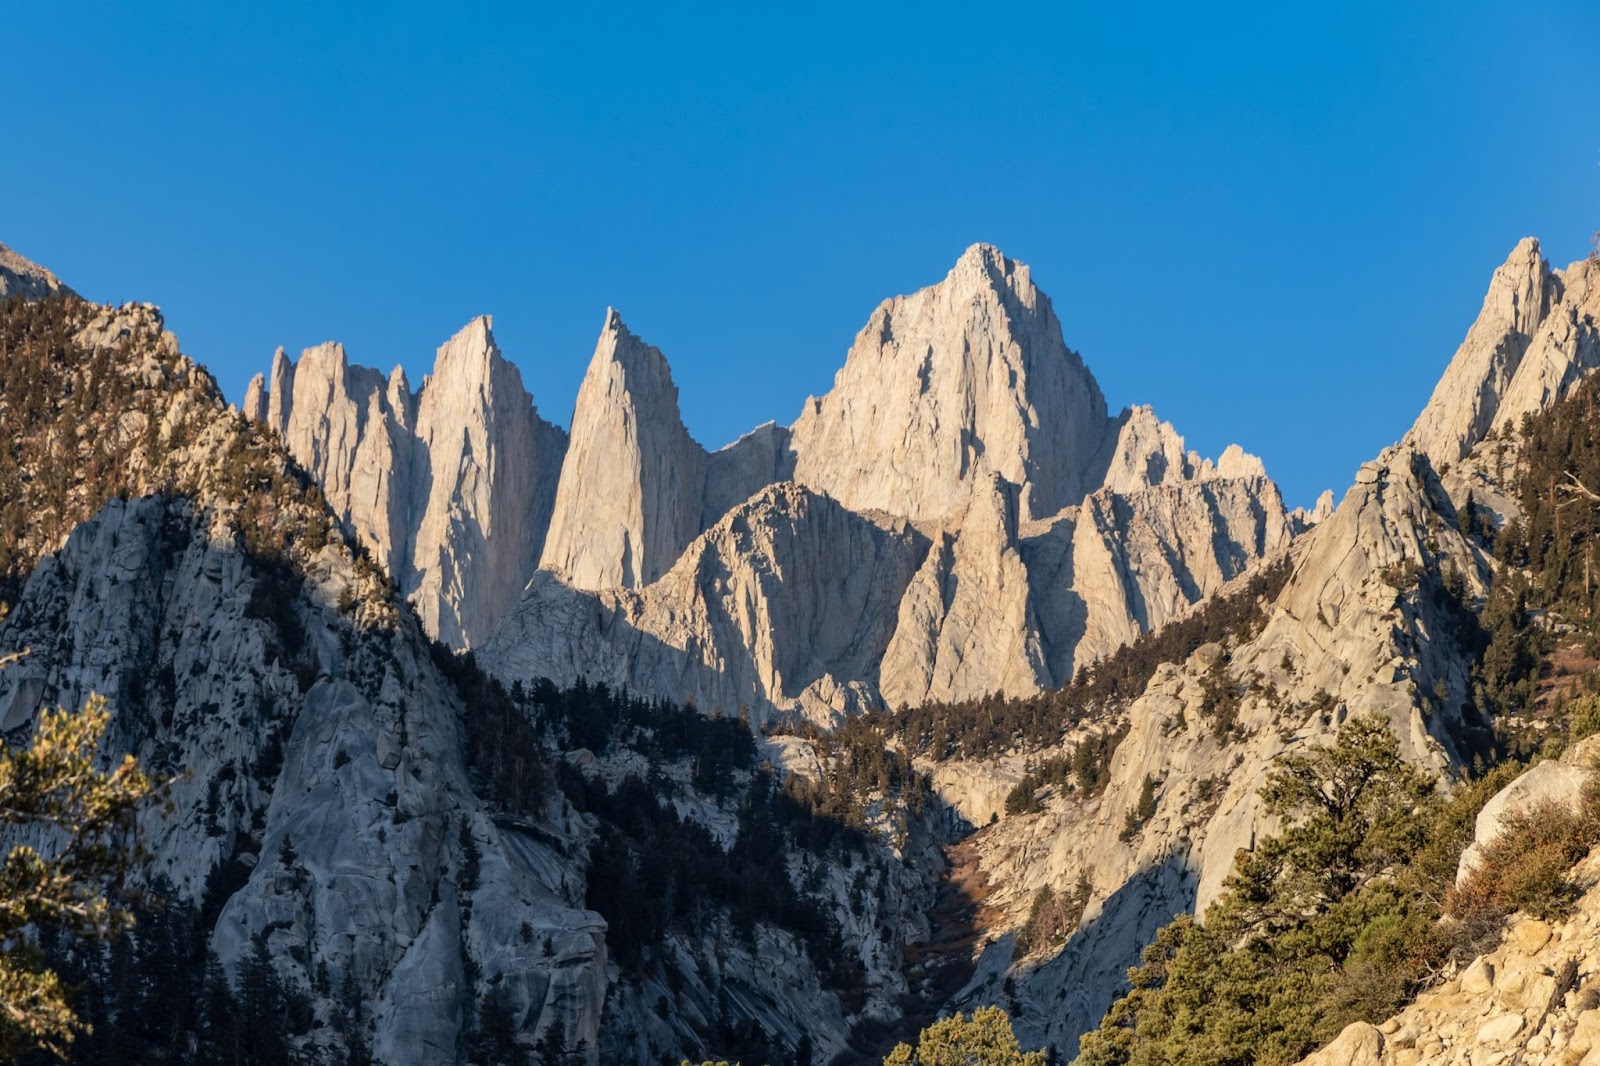 A sweeping view of peaks of Mt. Whitney